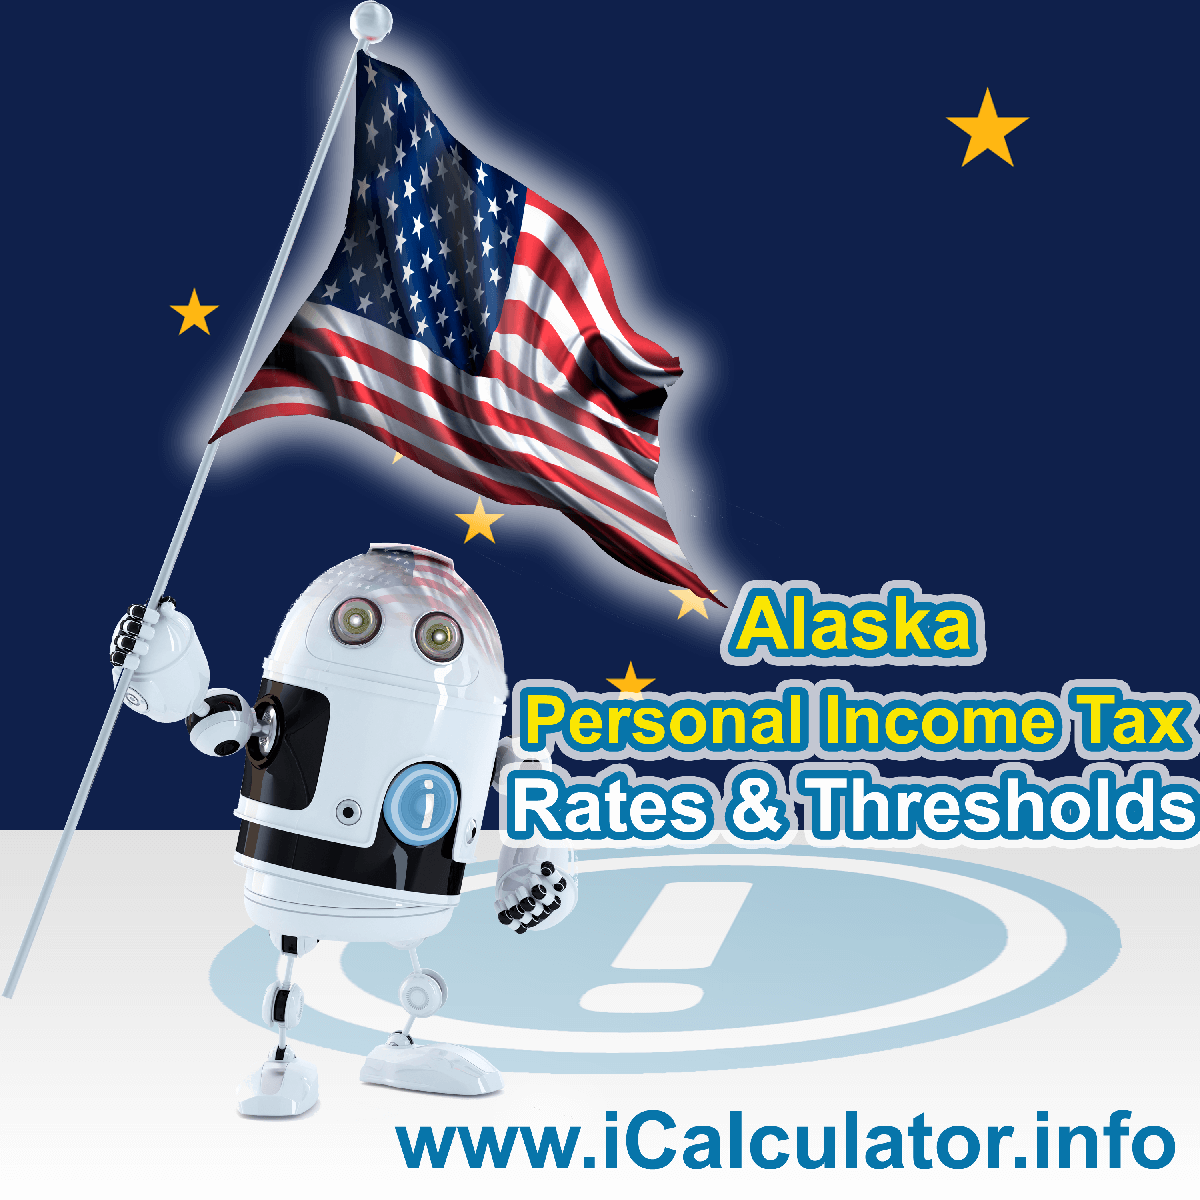 Alaska State Tax Tables 2019. This image displays details of the Alaska State Tax Tables for the 2019 tax return year which is provided in support of the 2019 US Tax Calculator